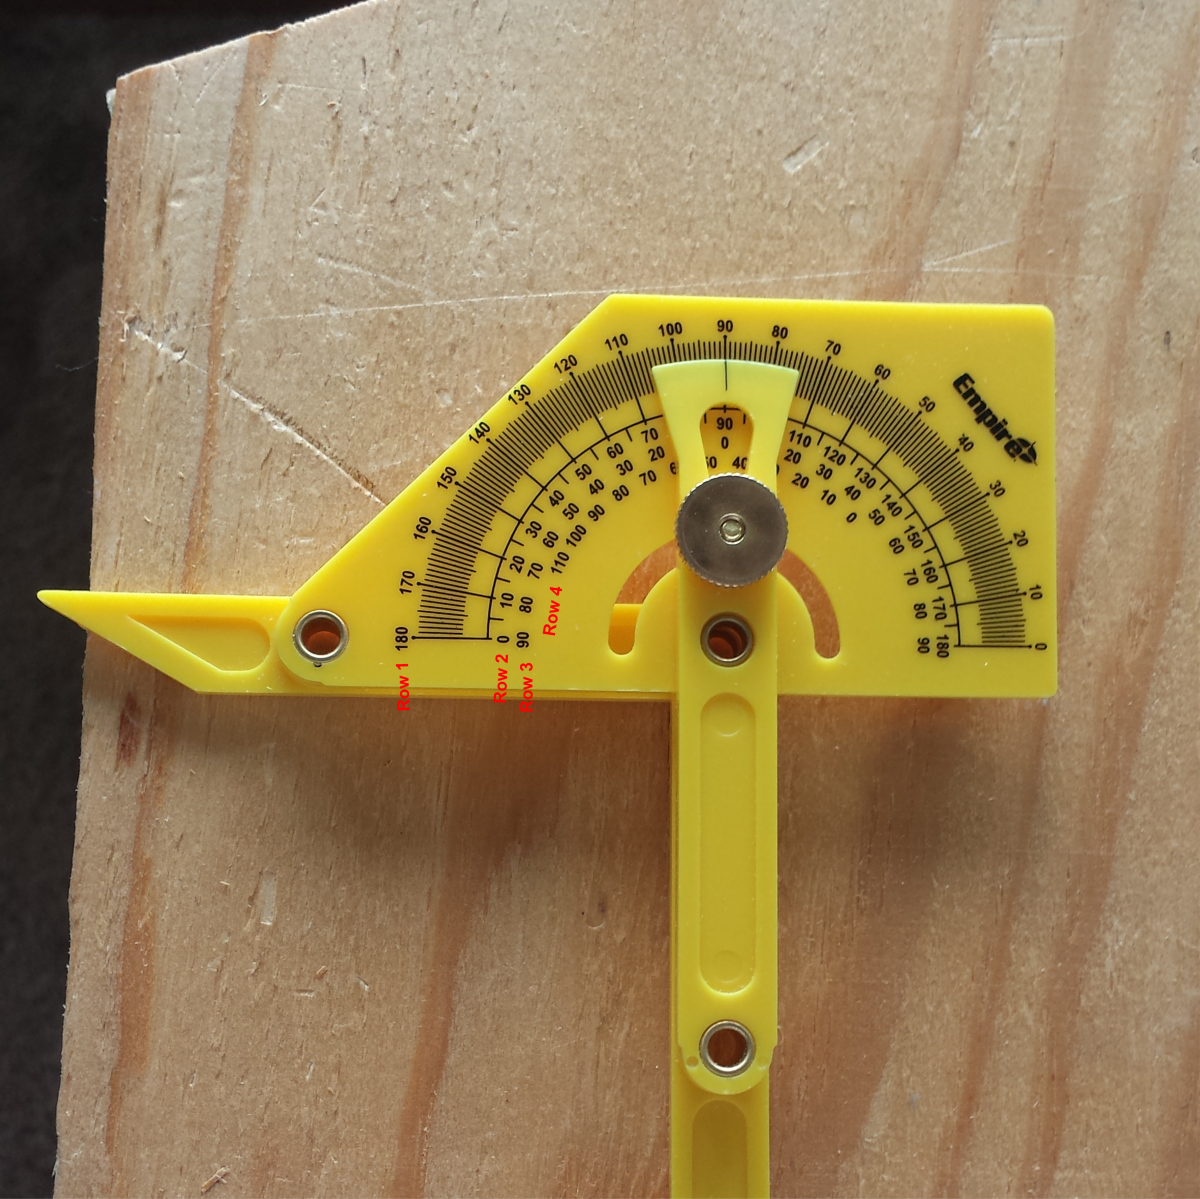 Find Angles and Mitres Fast Mitre-Mate 360 Degree Angle Finder Protractor Angle Gauge Easy and Error Free